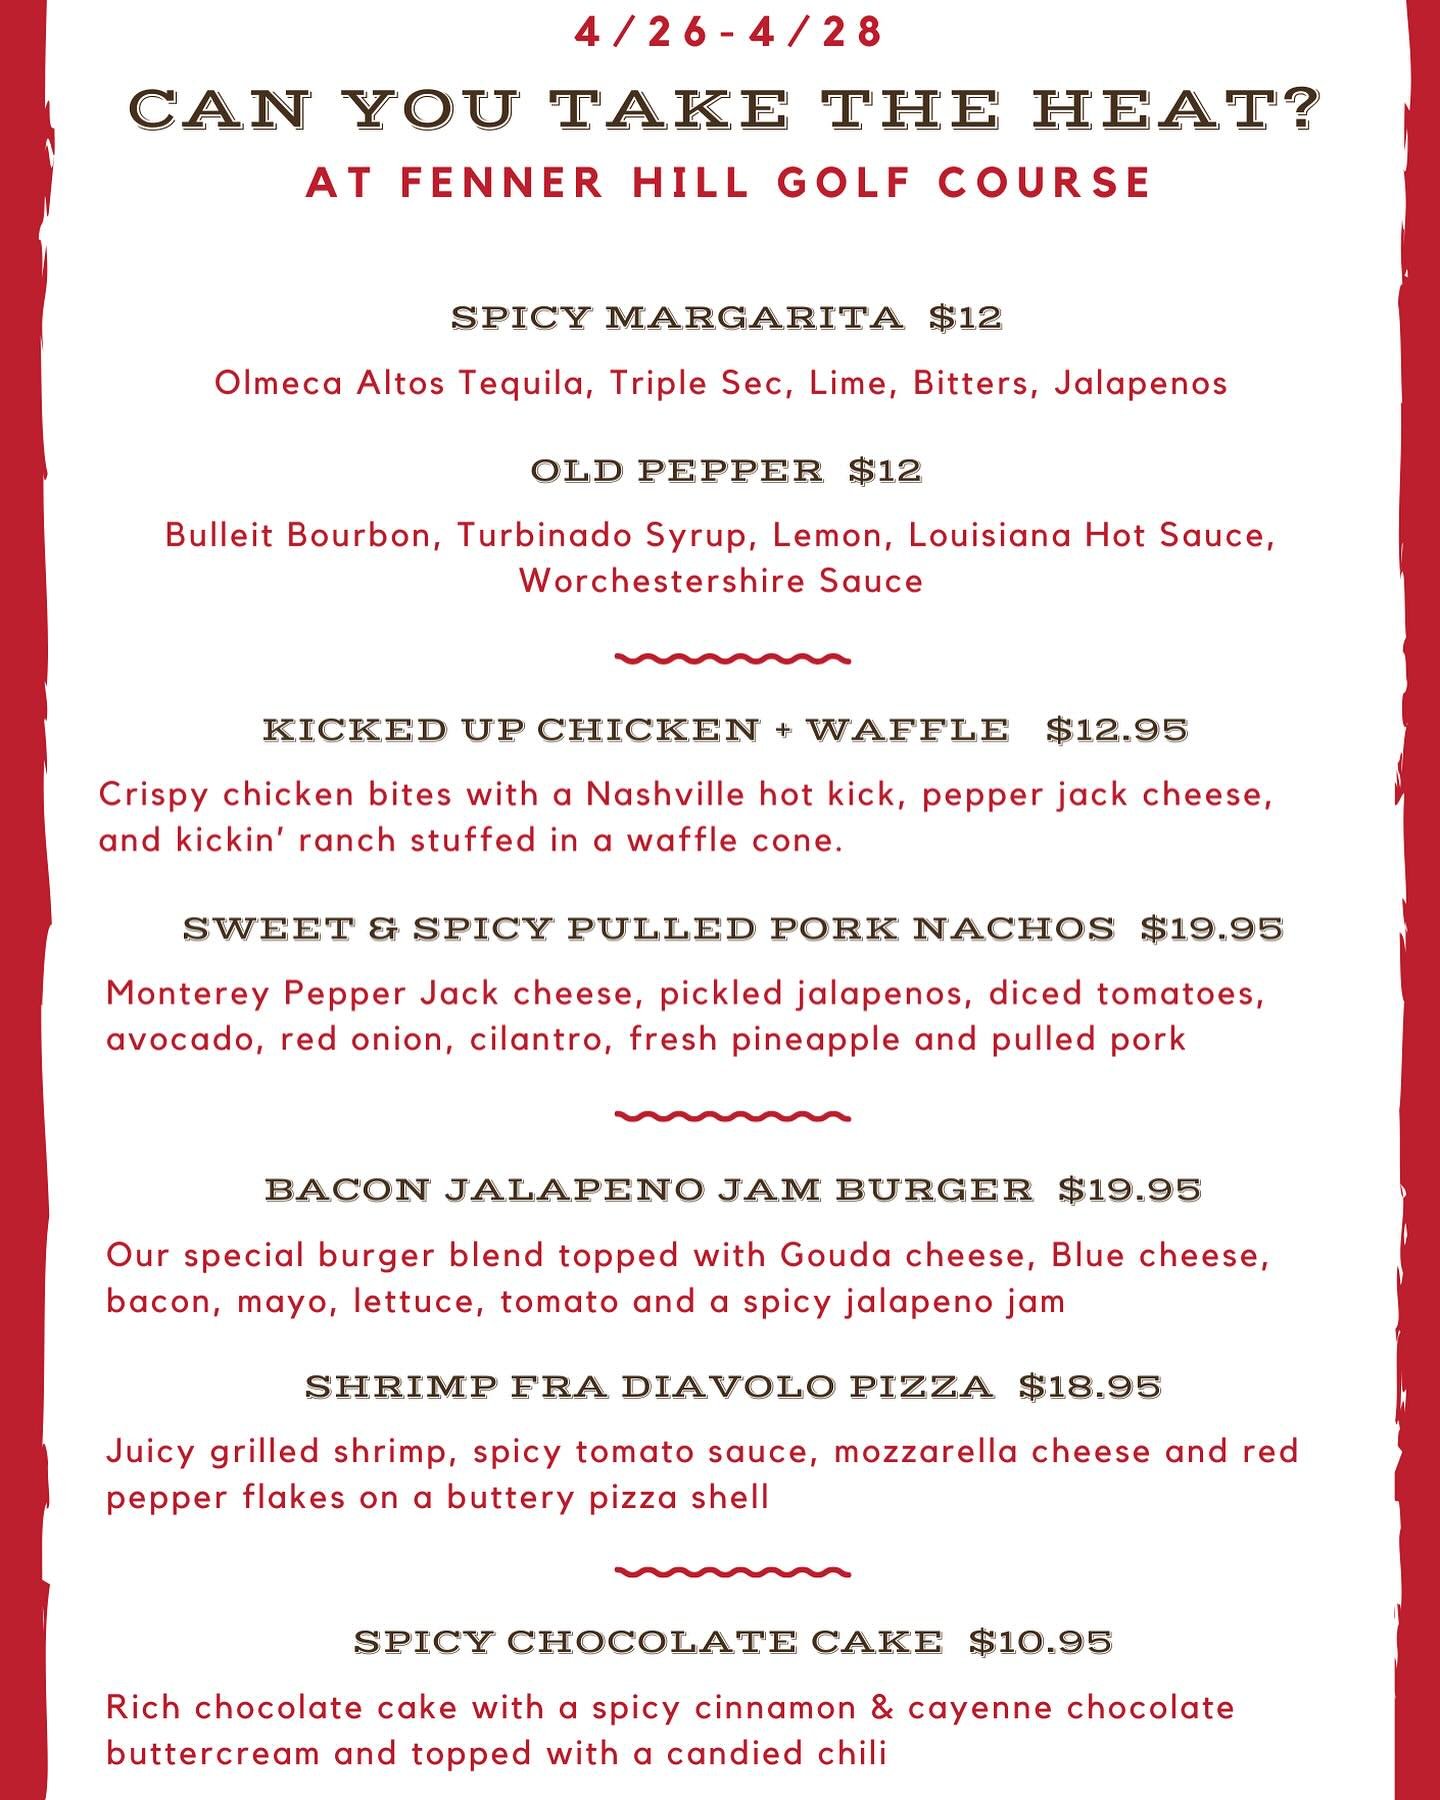 🌶️🌶️ Can you take the heat the heat this weekend  at Fenner Hill?? 🌶️🌶️

We&rsquo;re bringing the spice with some great cocktails, apps and entrees.

We&rsquo;ll see you all weekend long!